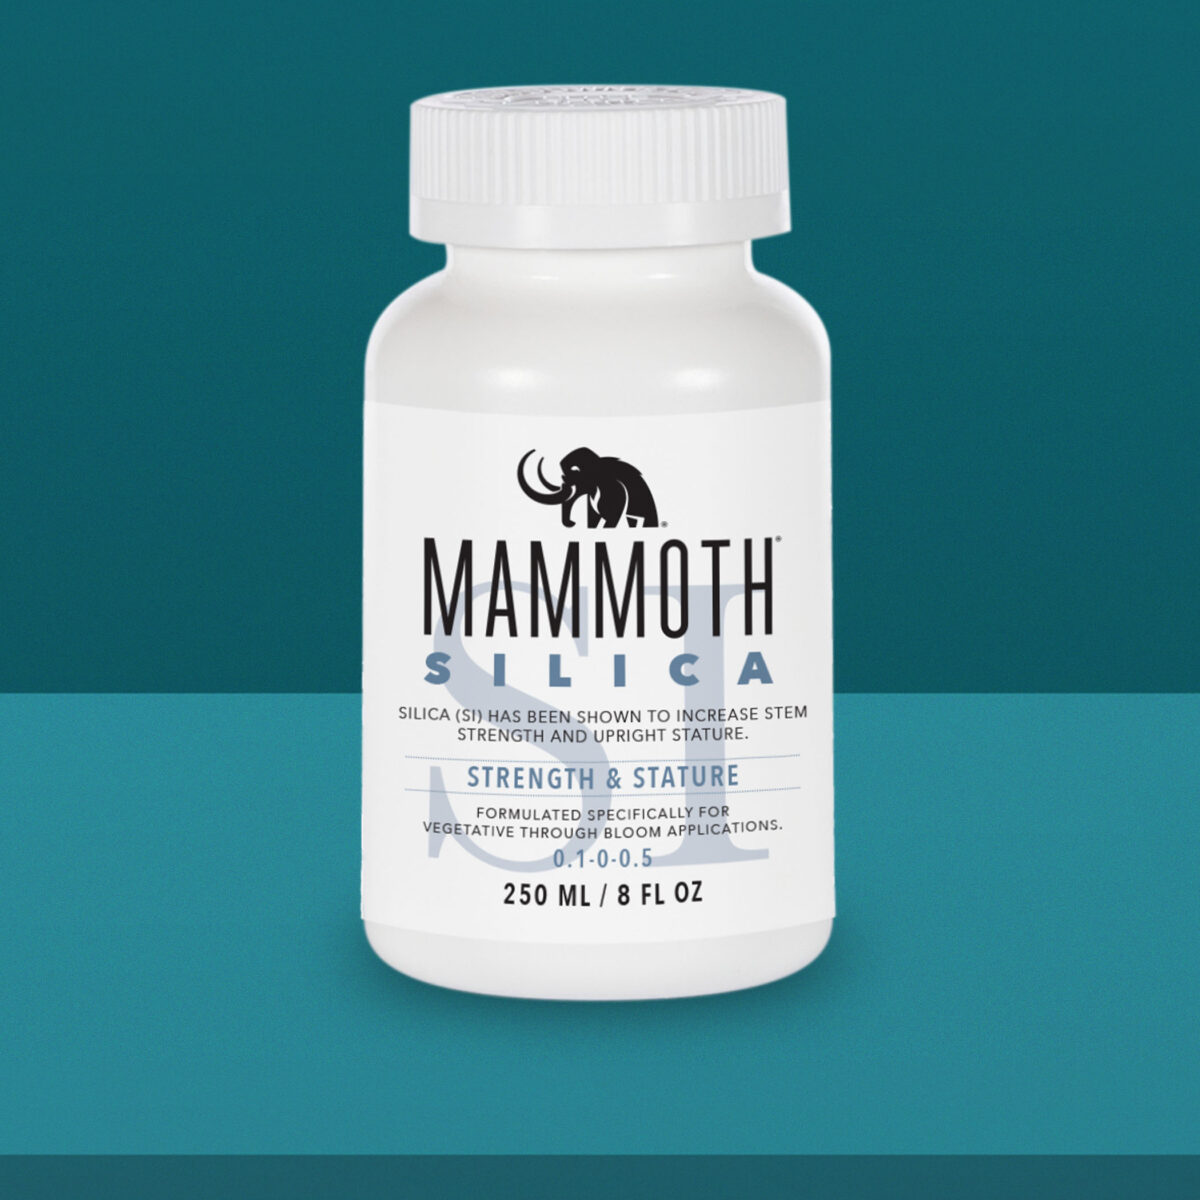 Mammoth Silica 250mL Product Image